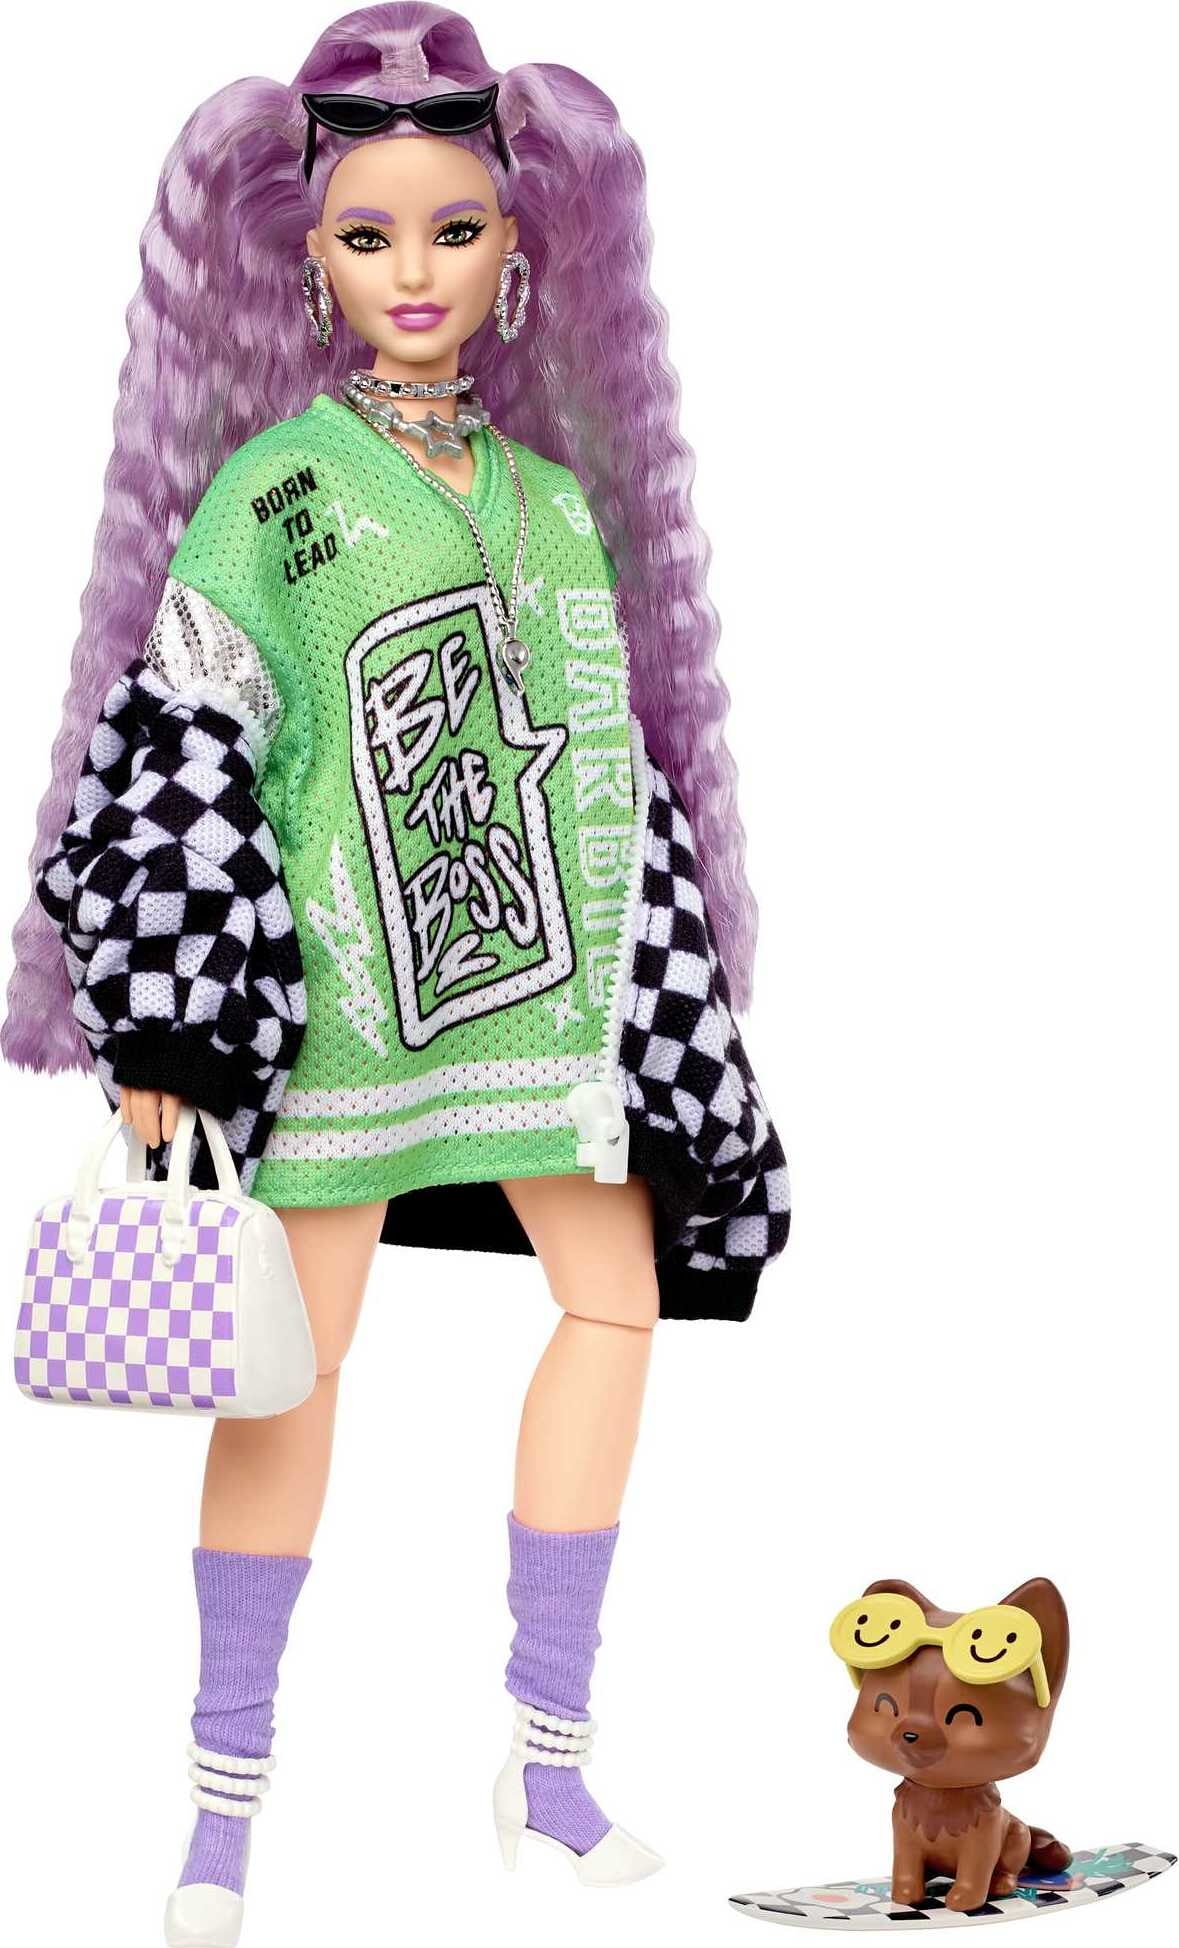 Barbie Doll and Accessories, Barbie Extra Doll with Lavender Hair -  